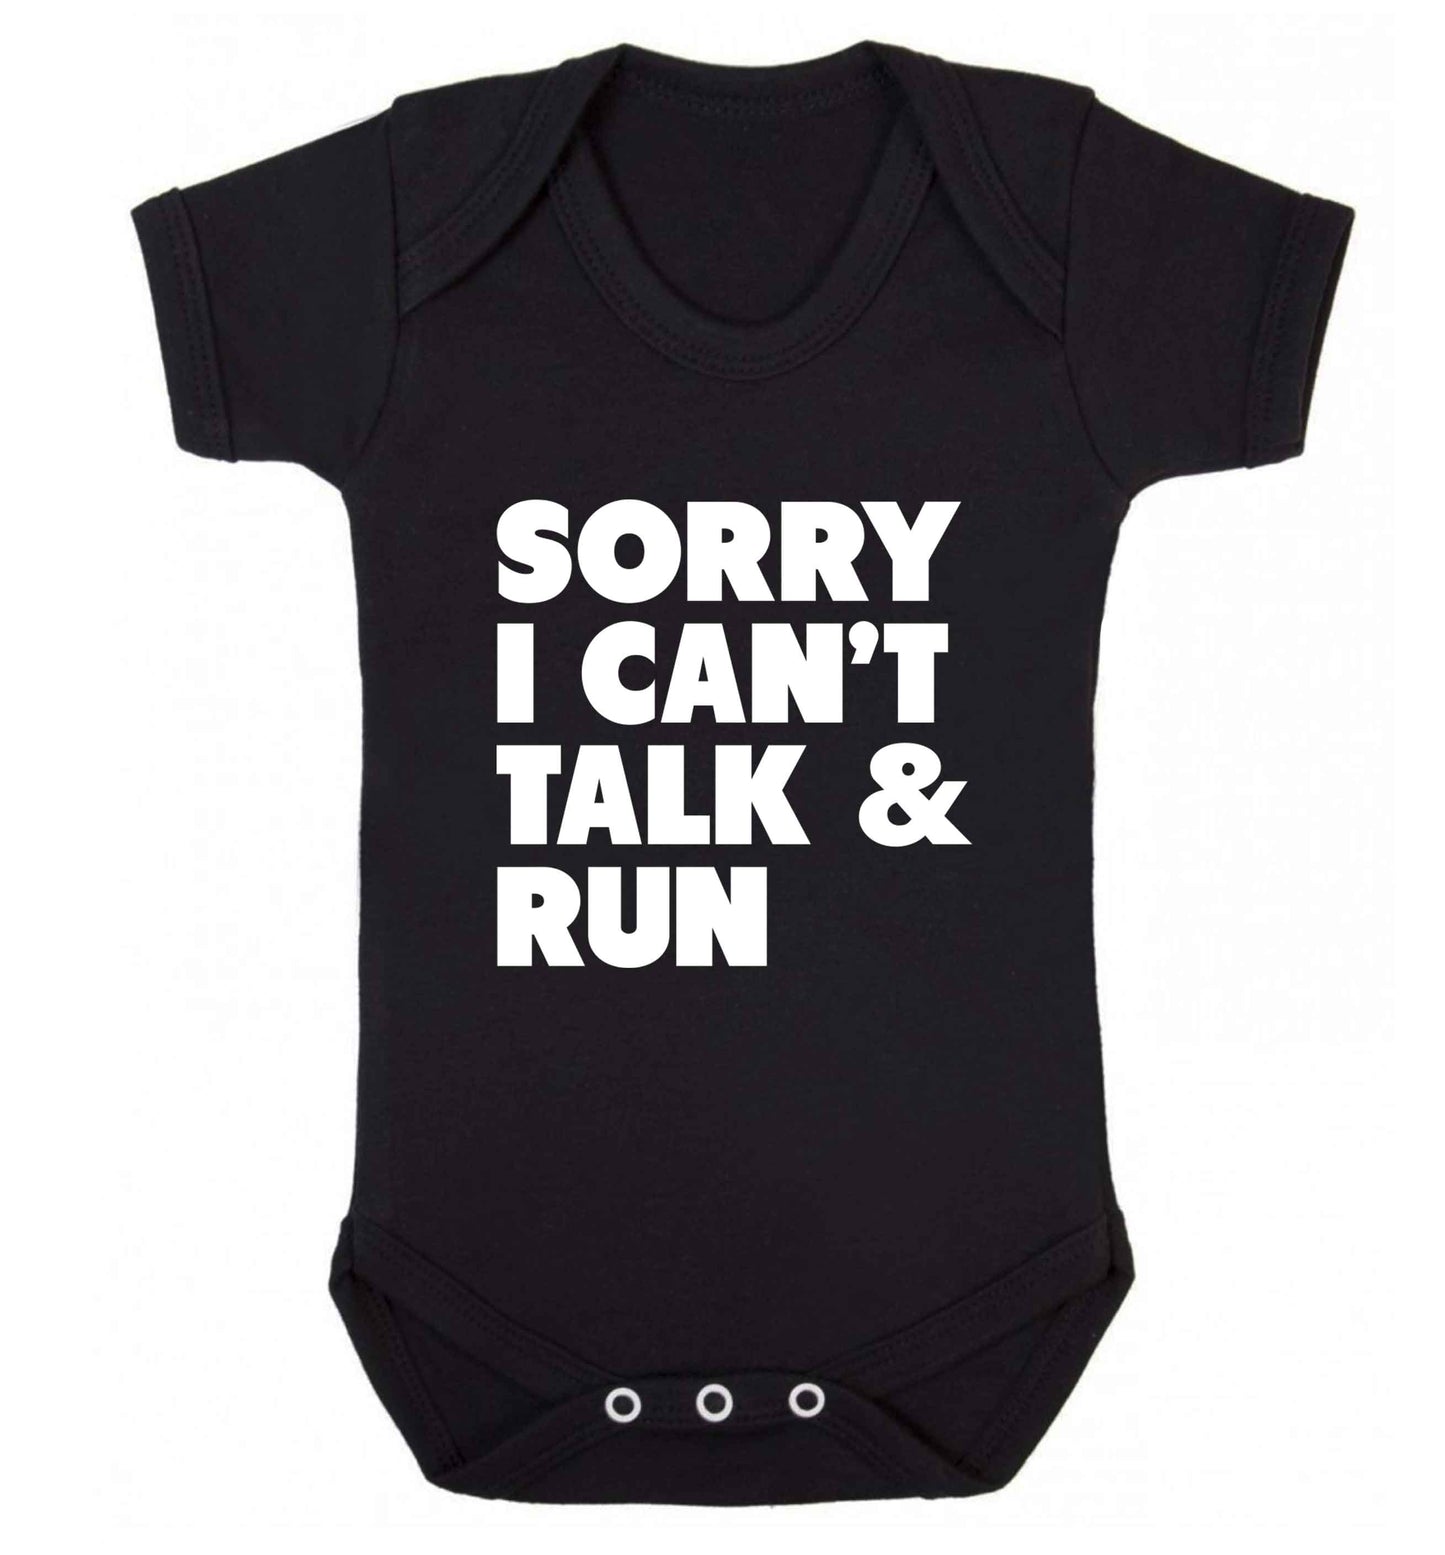 Sorry I can't talk and run baby vest black 18-24 months